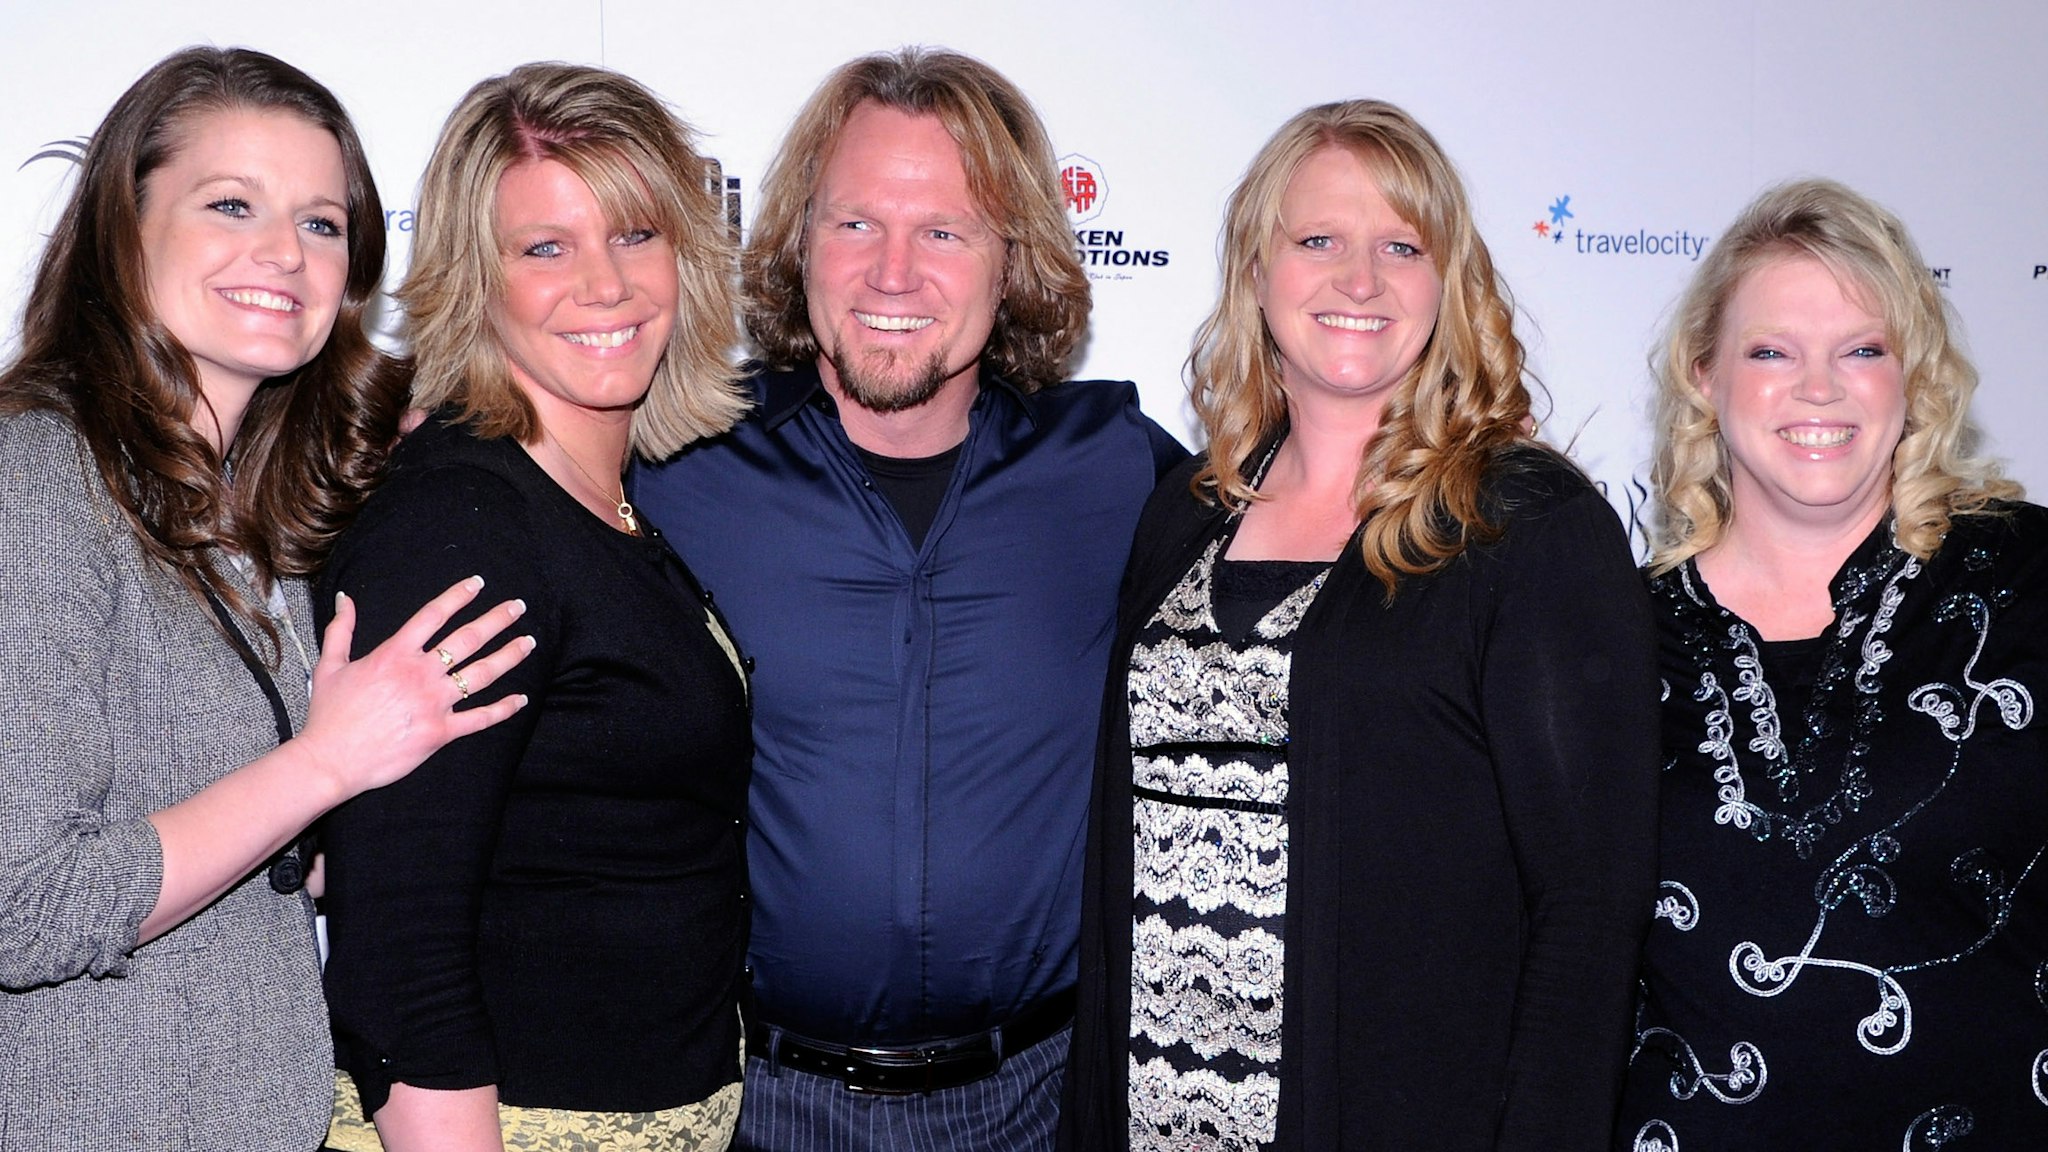 Sister Wives' Star Comes Out As Transgender, Warns Fans On Pronouns.